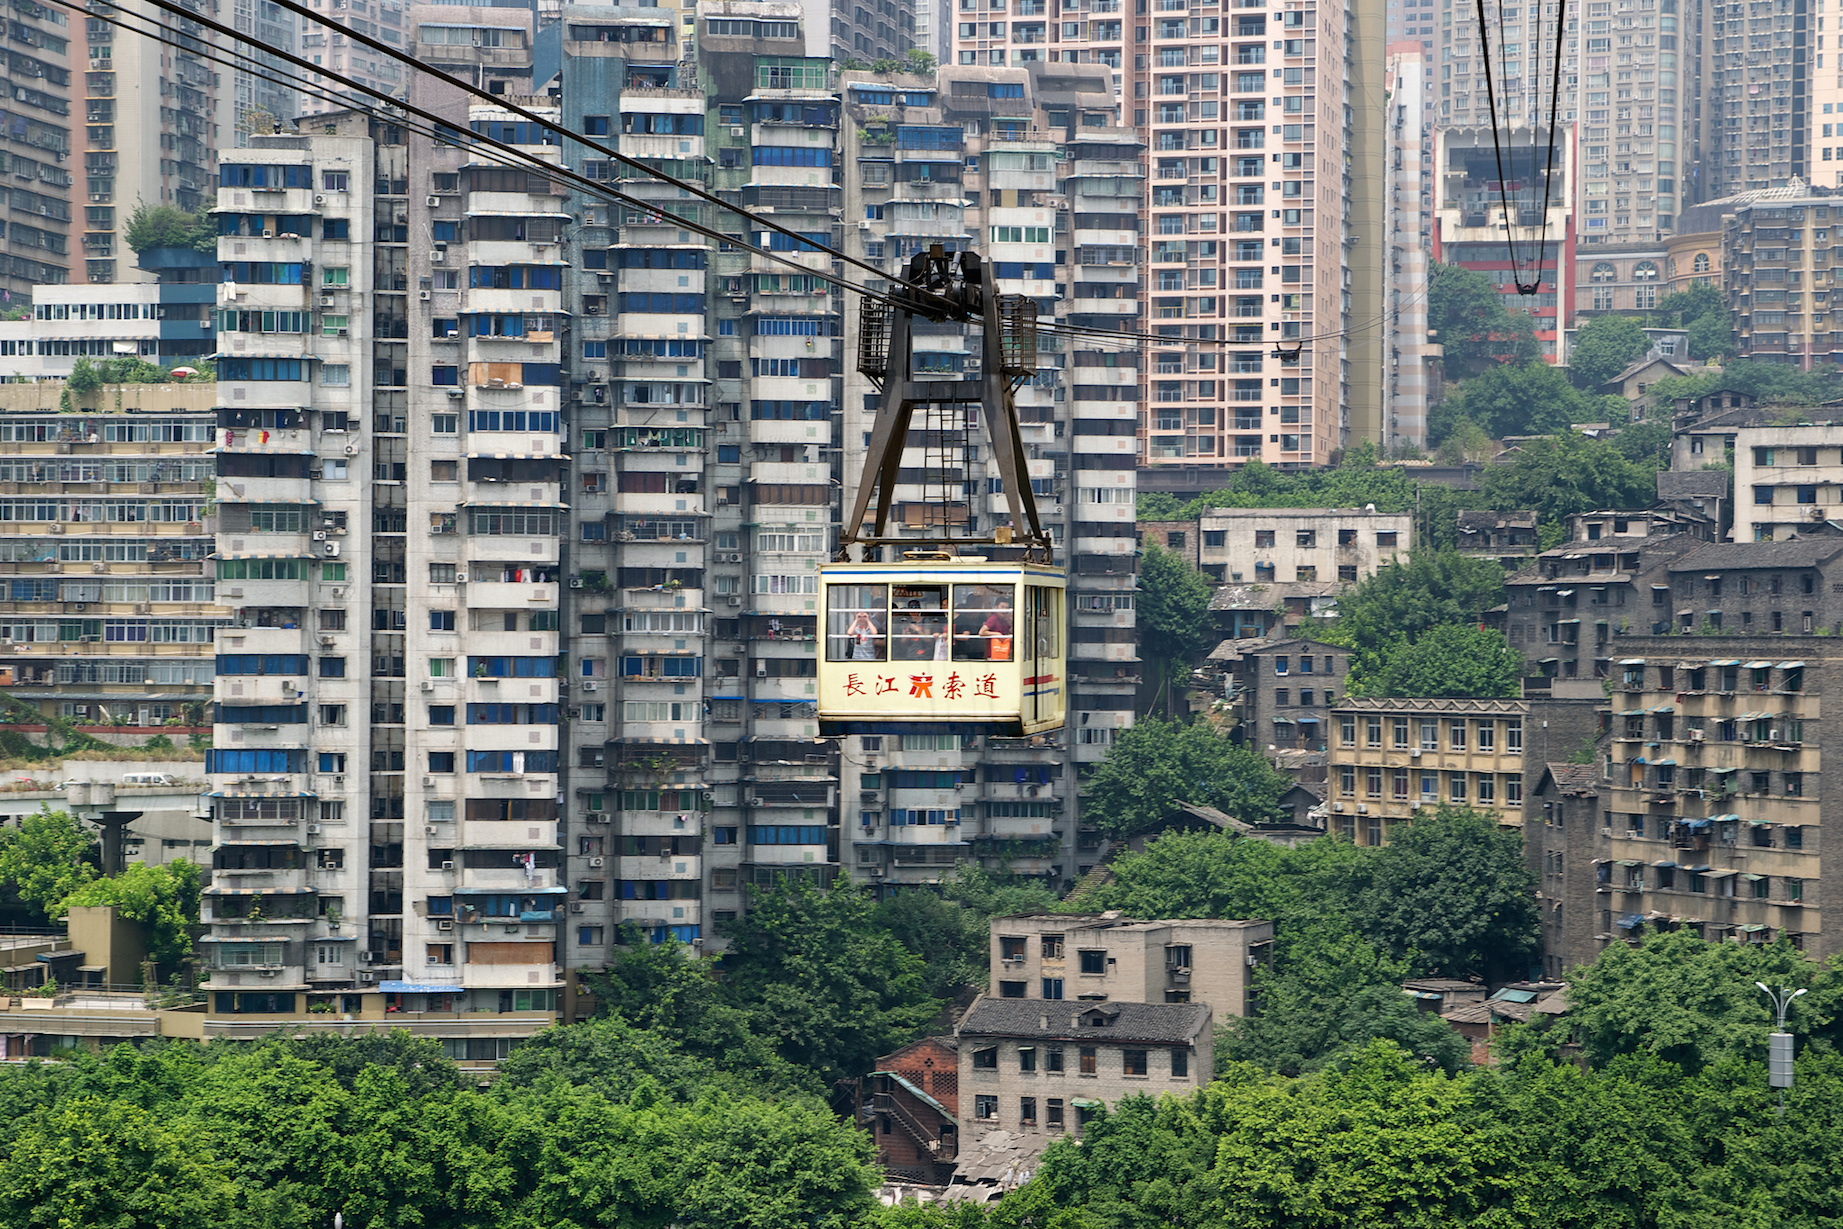 General 1843x1229 city urban building sprawl China cable car cable cars